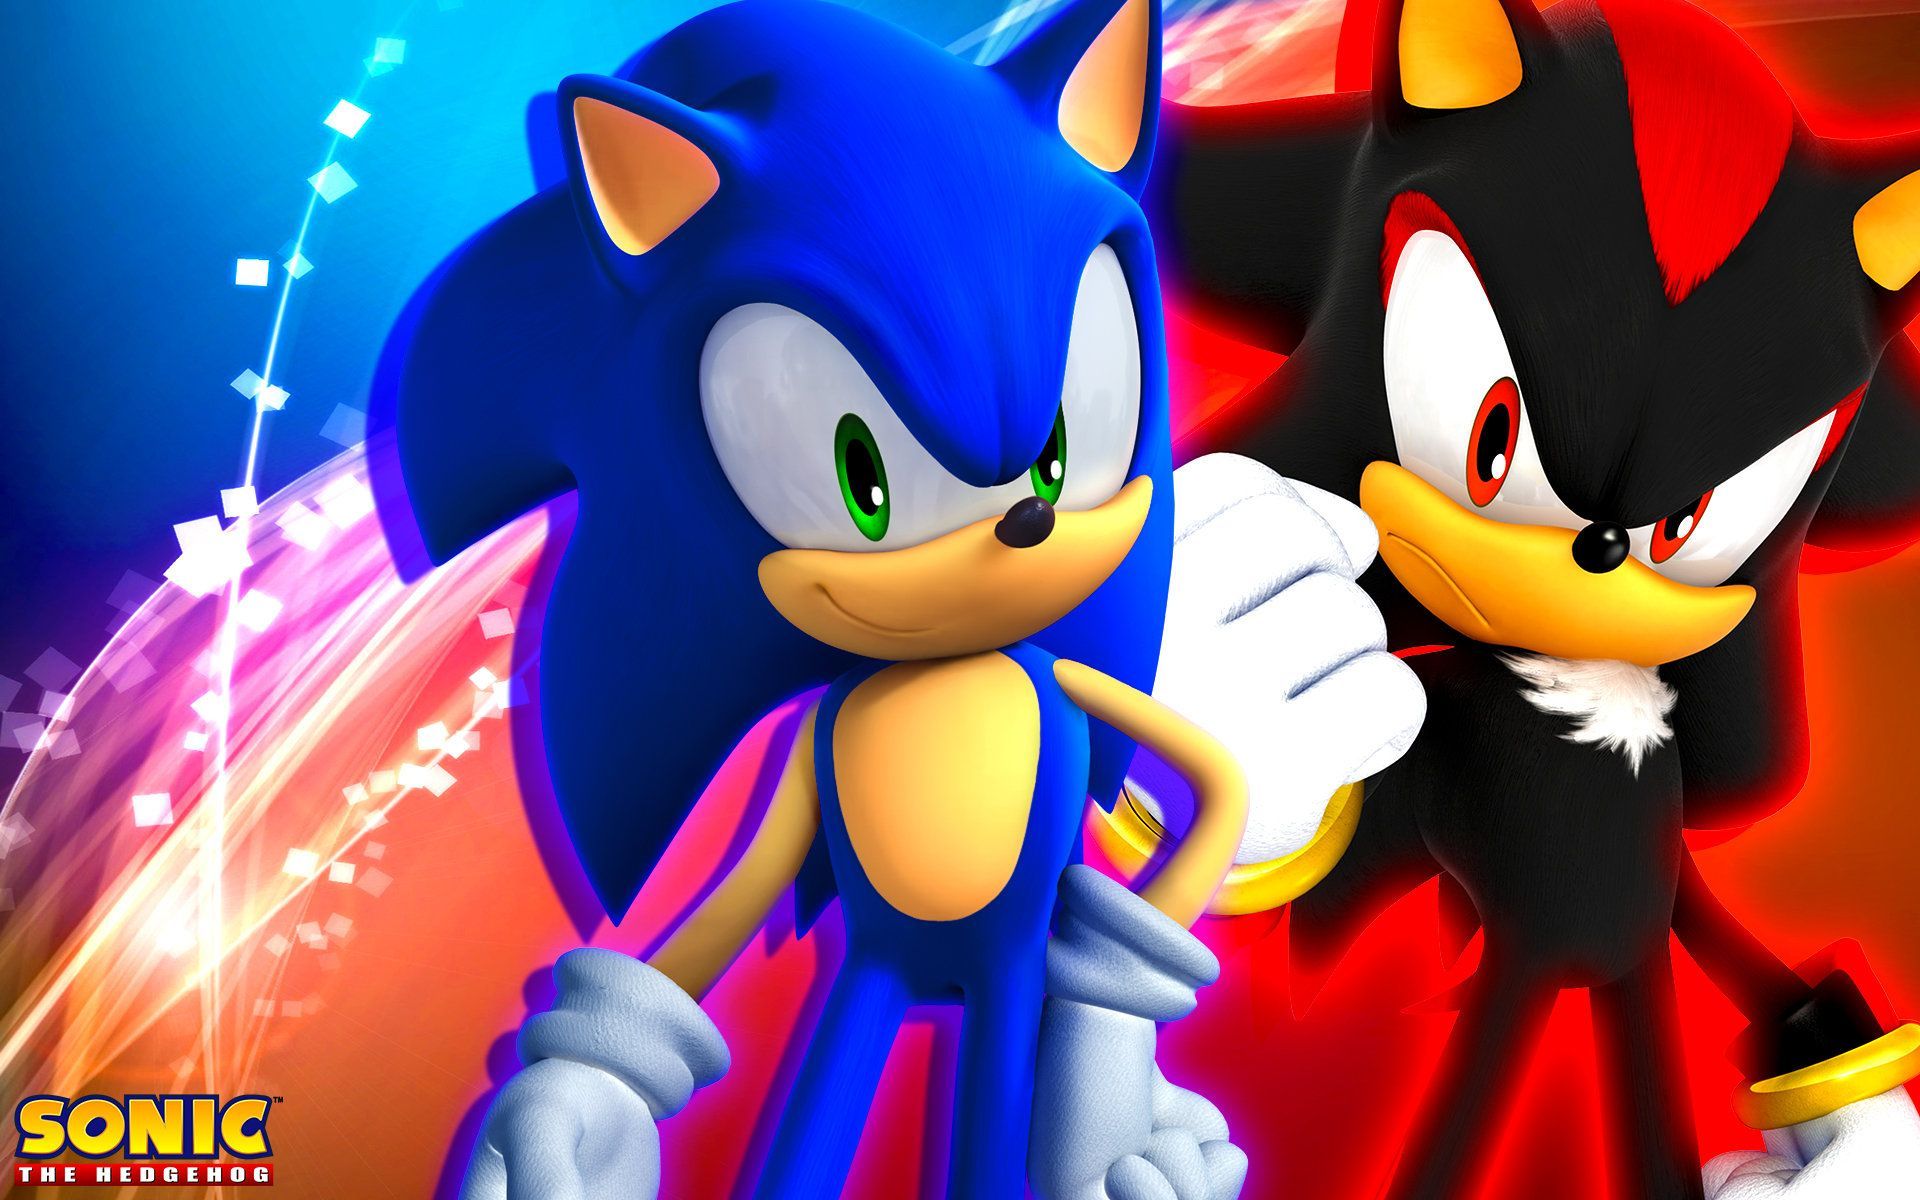 Sonic And Shadow Wallpaper Group Wallpaper House.com